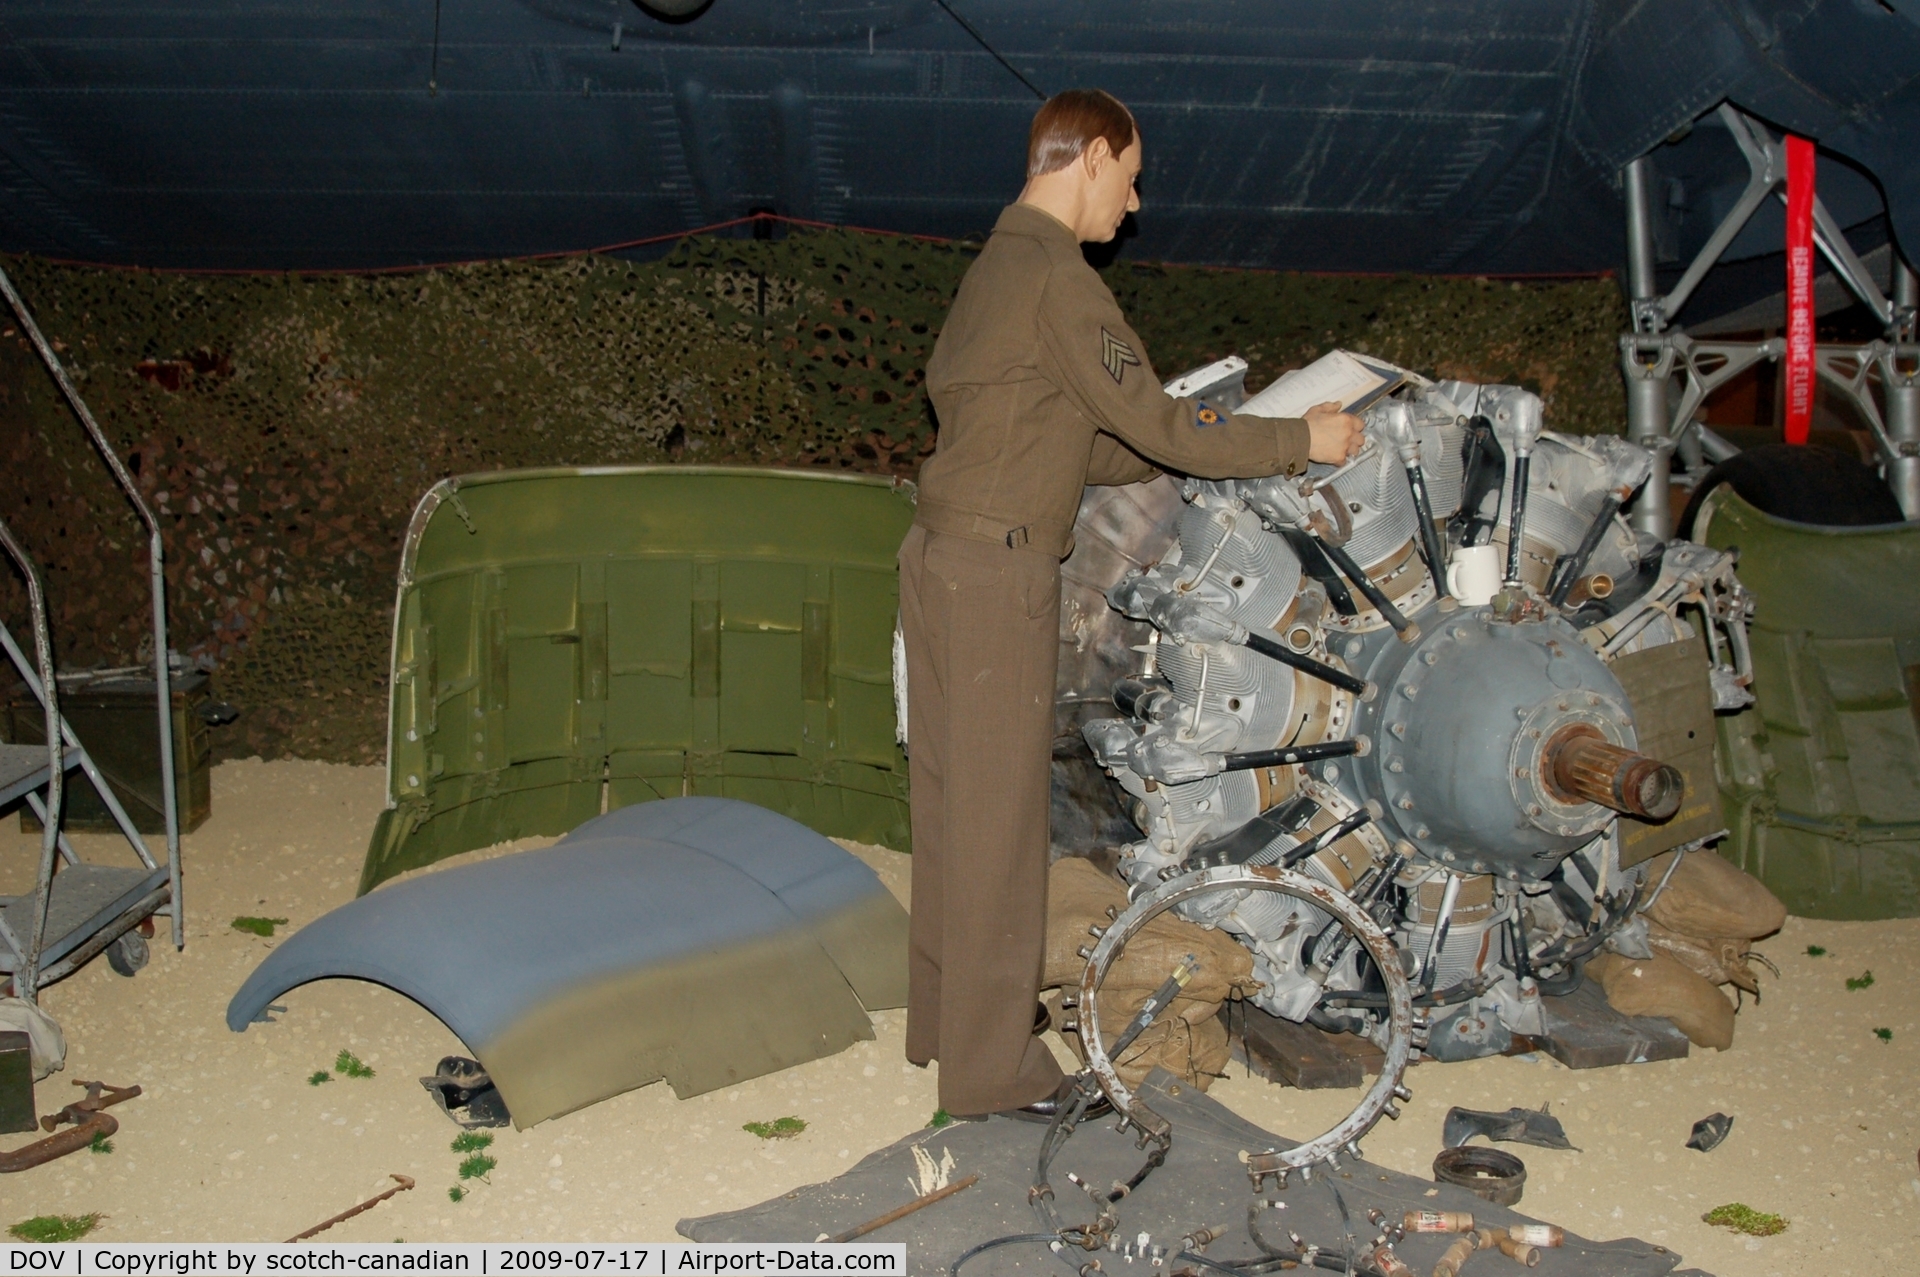 Dover Afb Airport (DOV) - C-47 Engine Change at the Air Mobility Command Museum, Dover AFB, DE